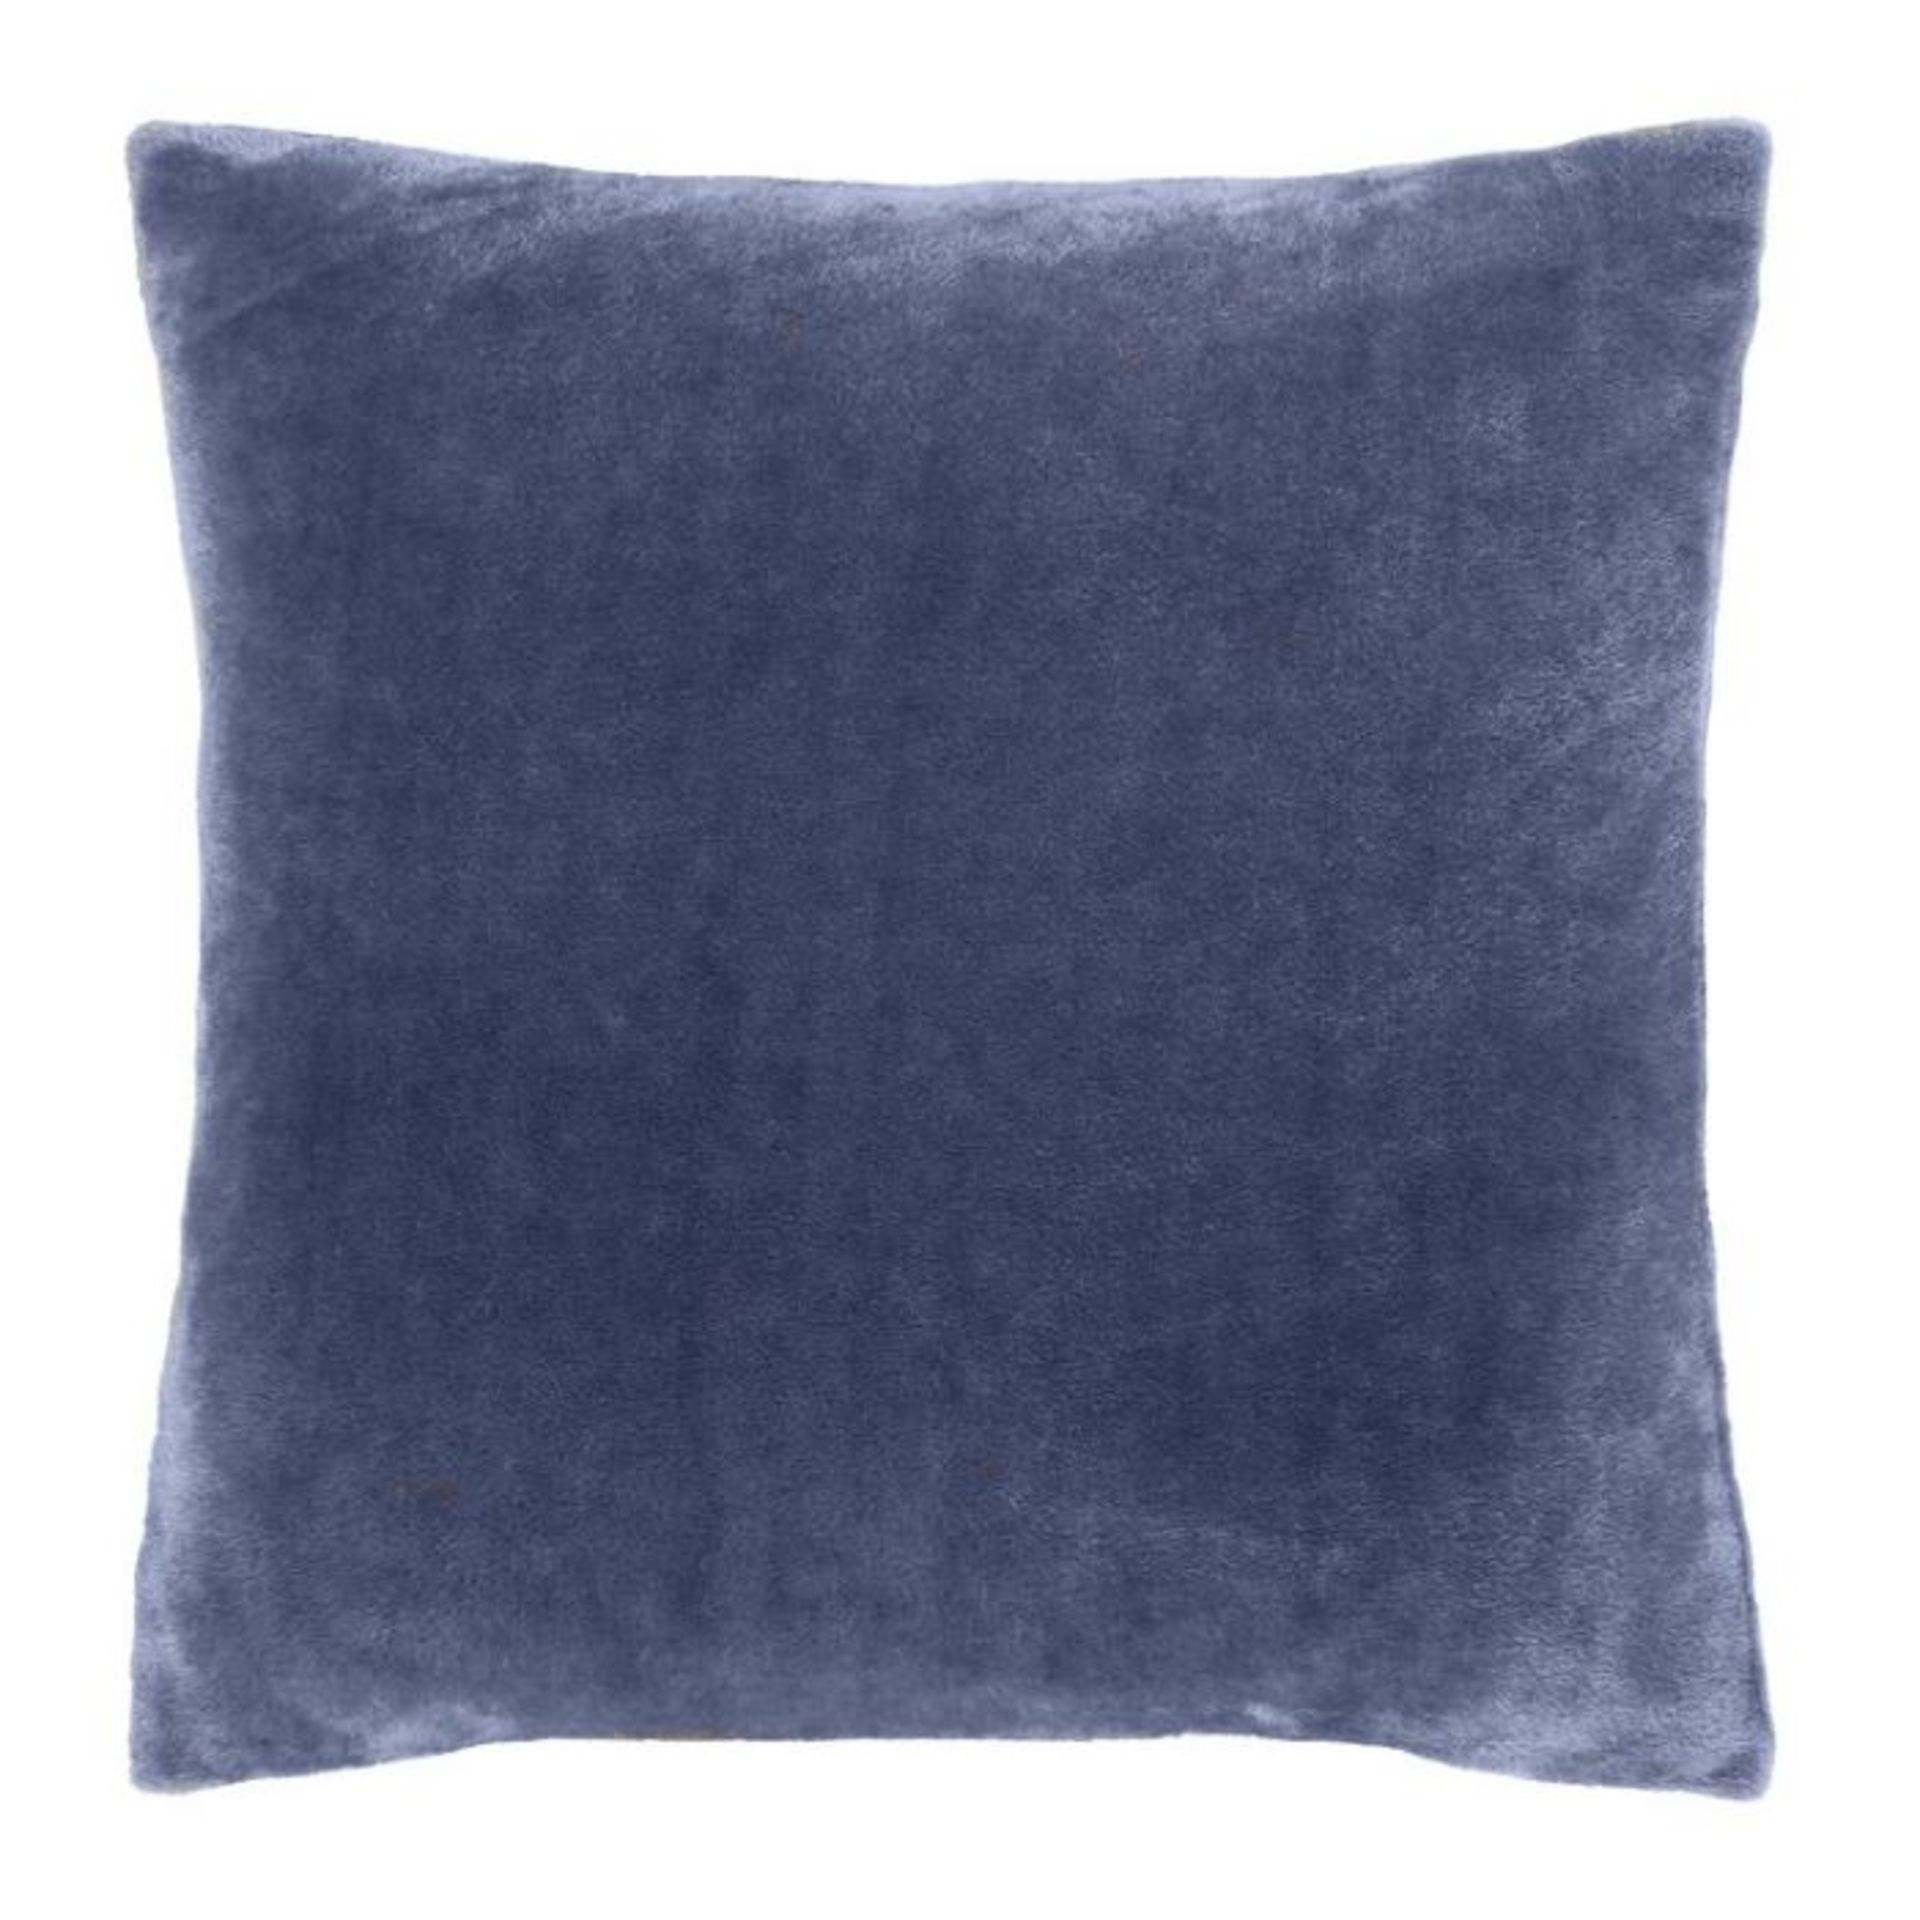 Catherine Lansfield, Cushion with Filling (BLUE) - RRP £15.99 (QXK11061 - 26639/51)